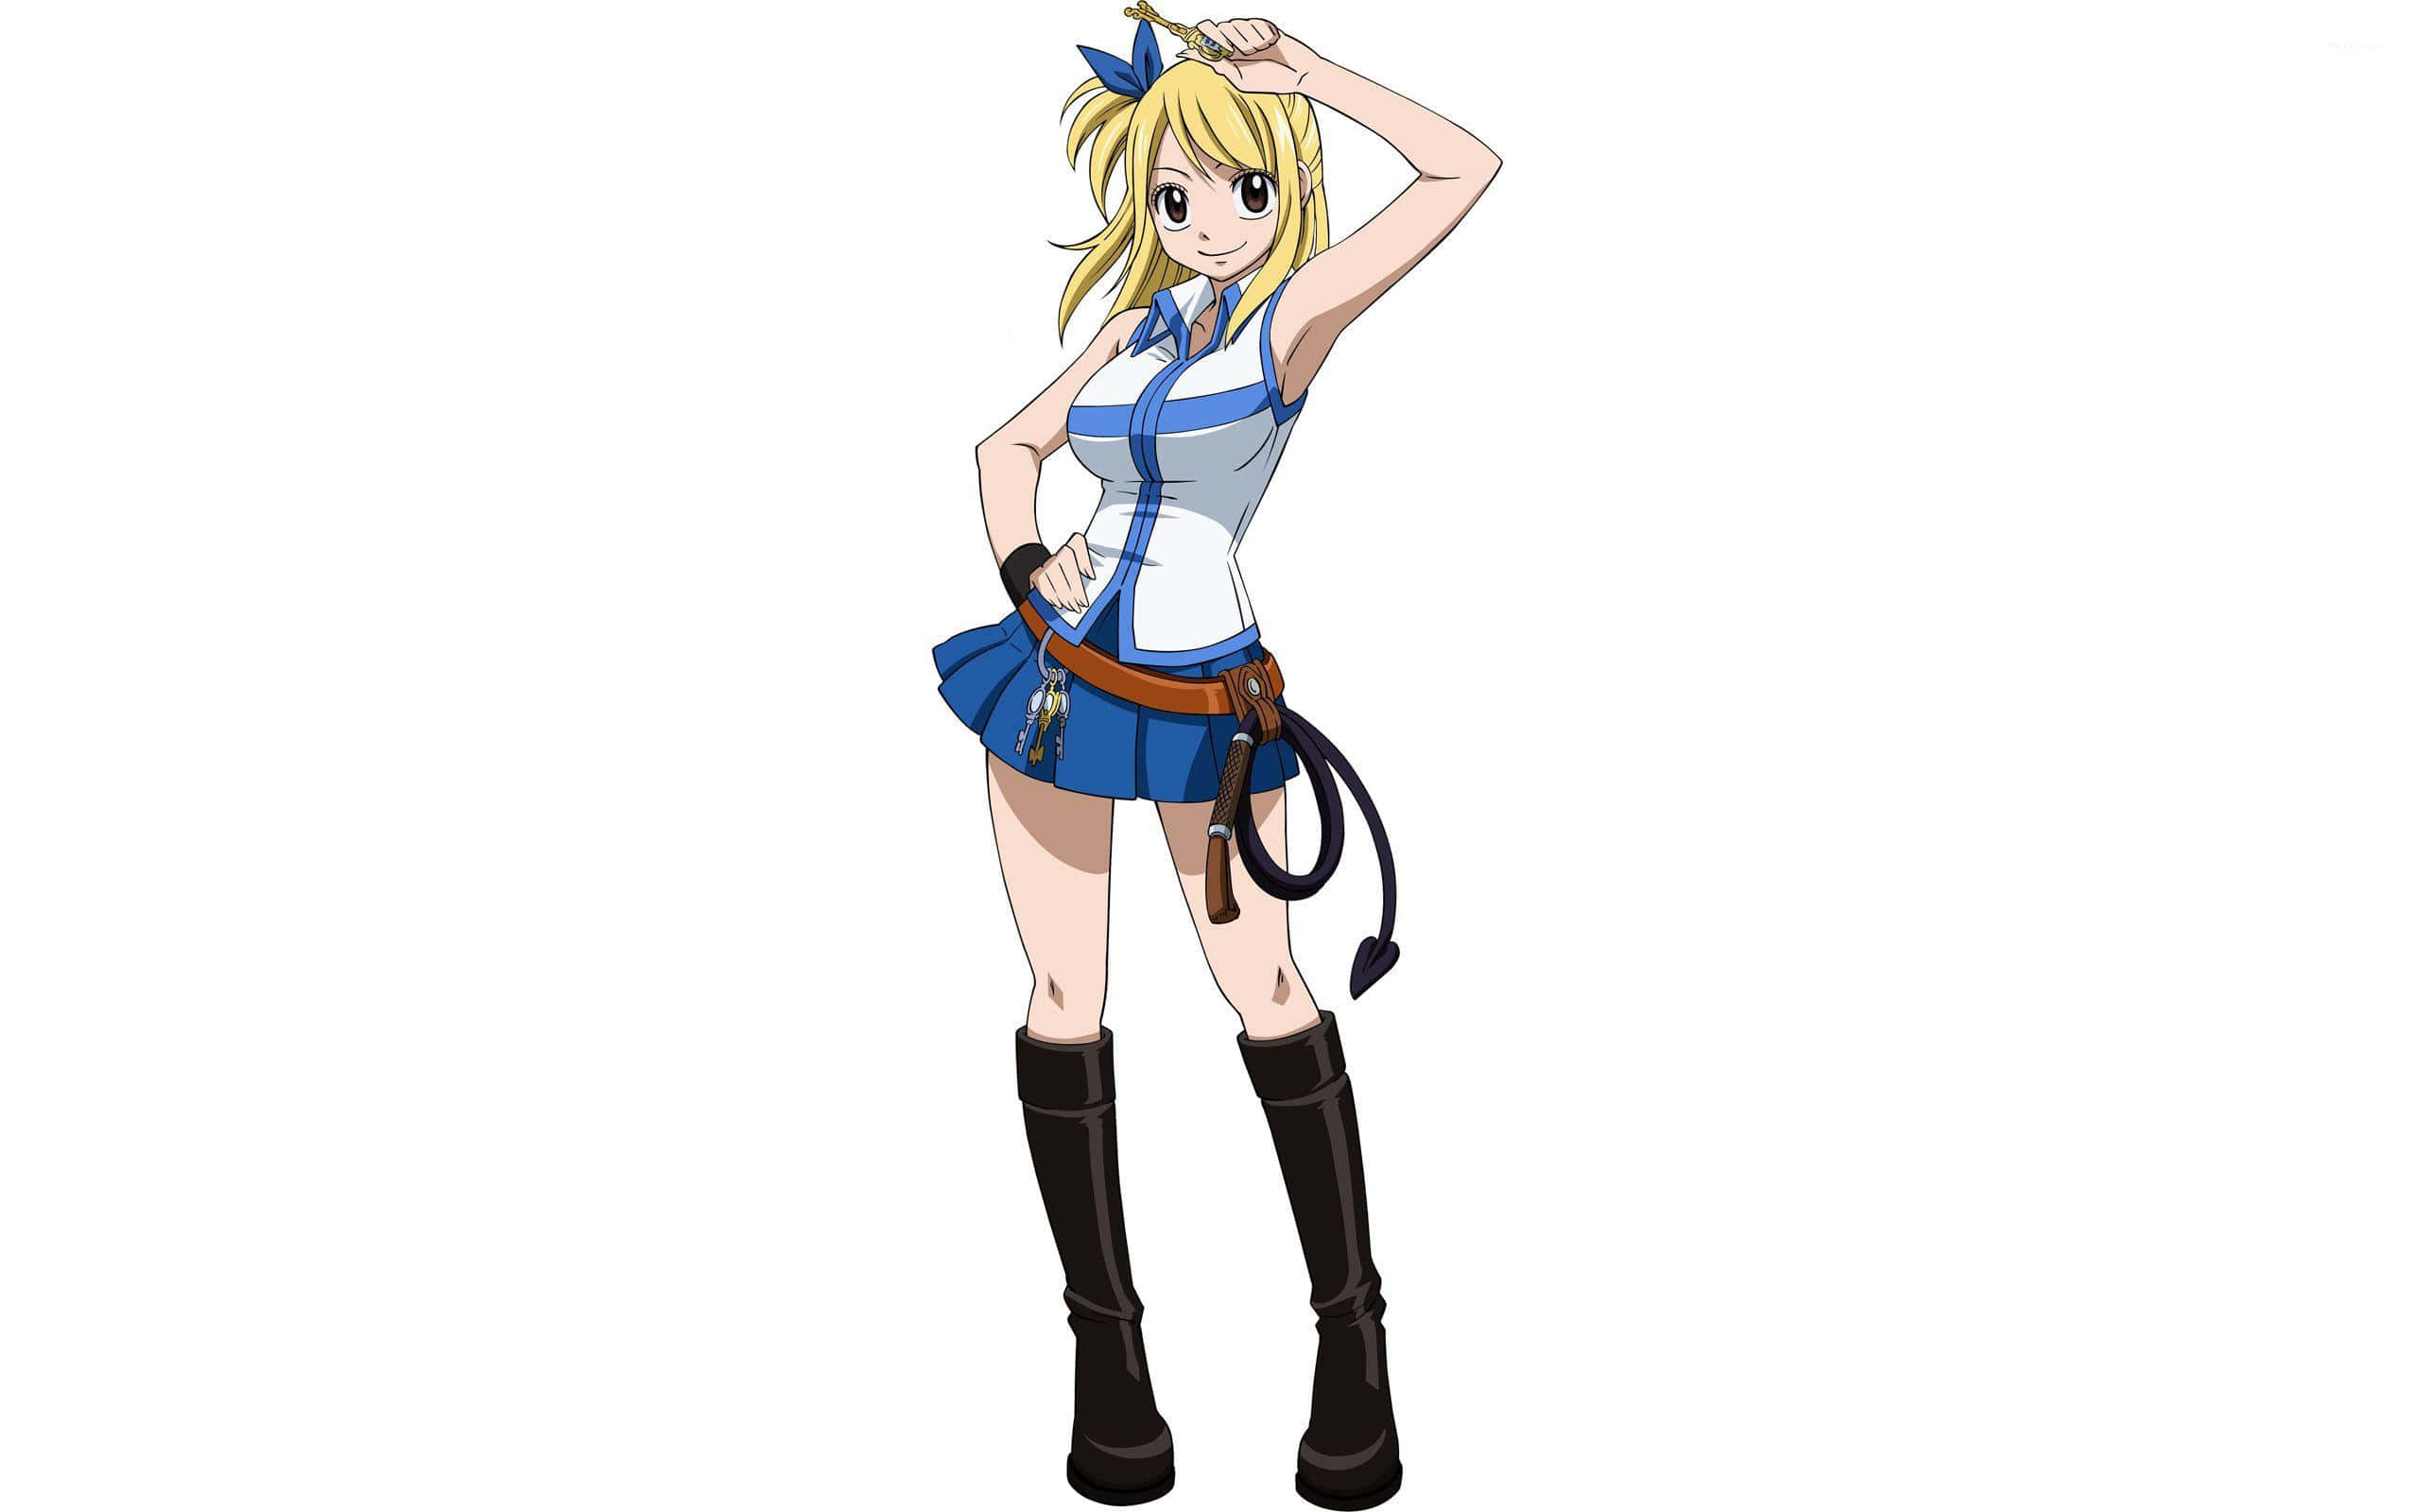 Enchanting Lucy Heartfilia From Fairy Tail Background